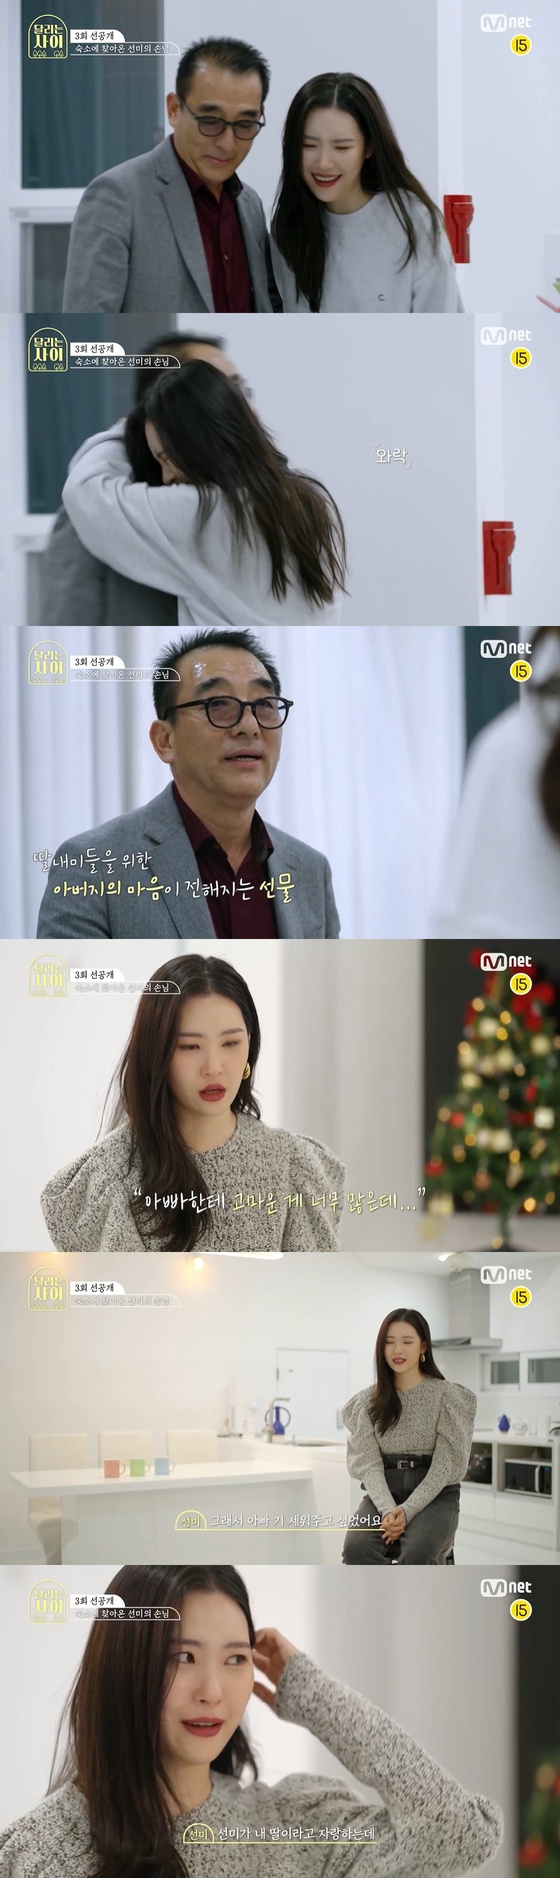 Sunmi, confession of heartfelt heart for her new father “Thank you so much”…  Netizens support (general)